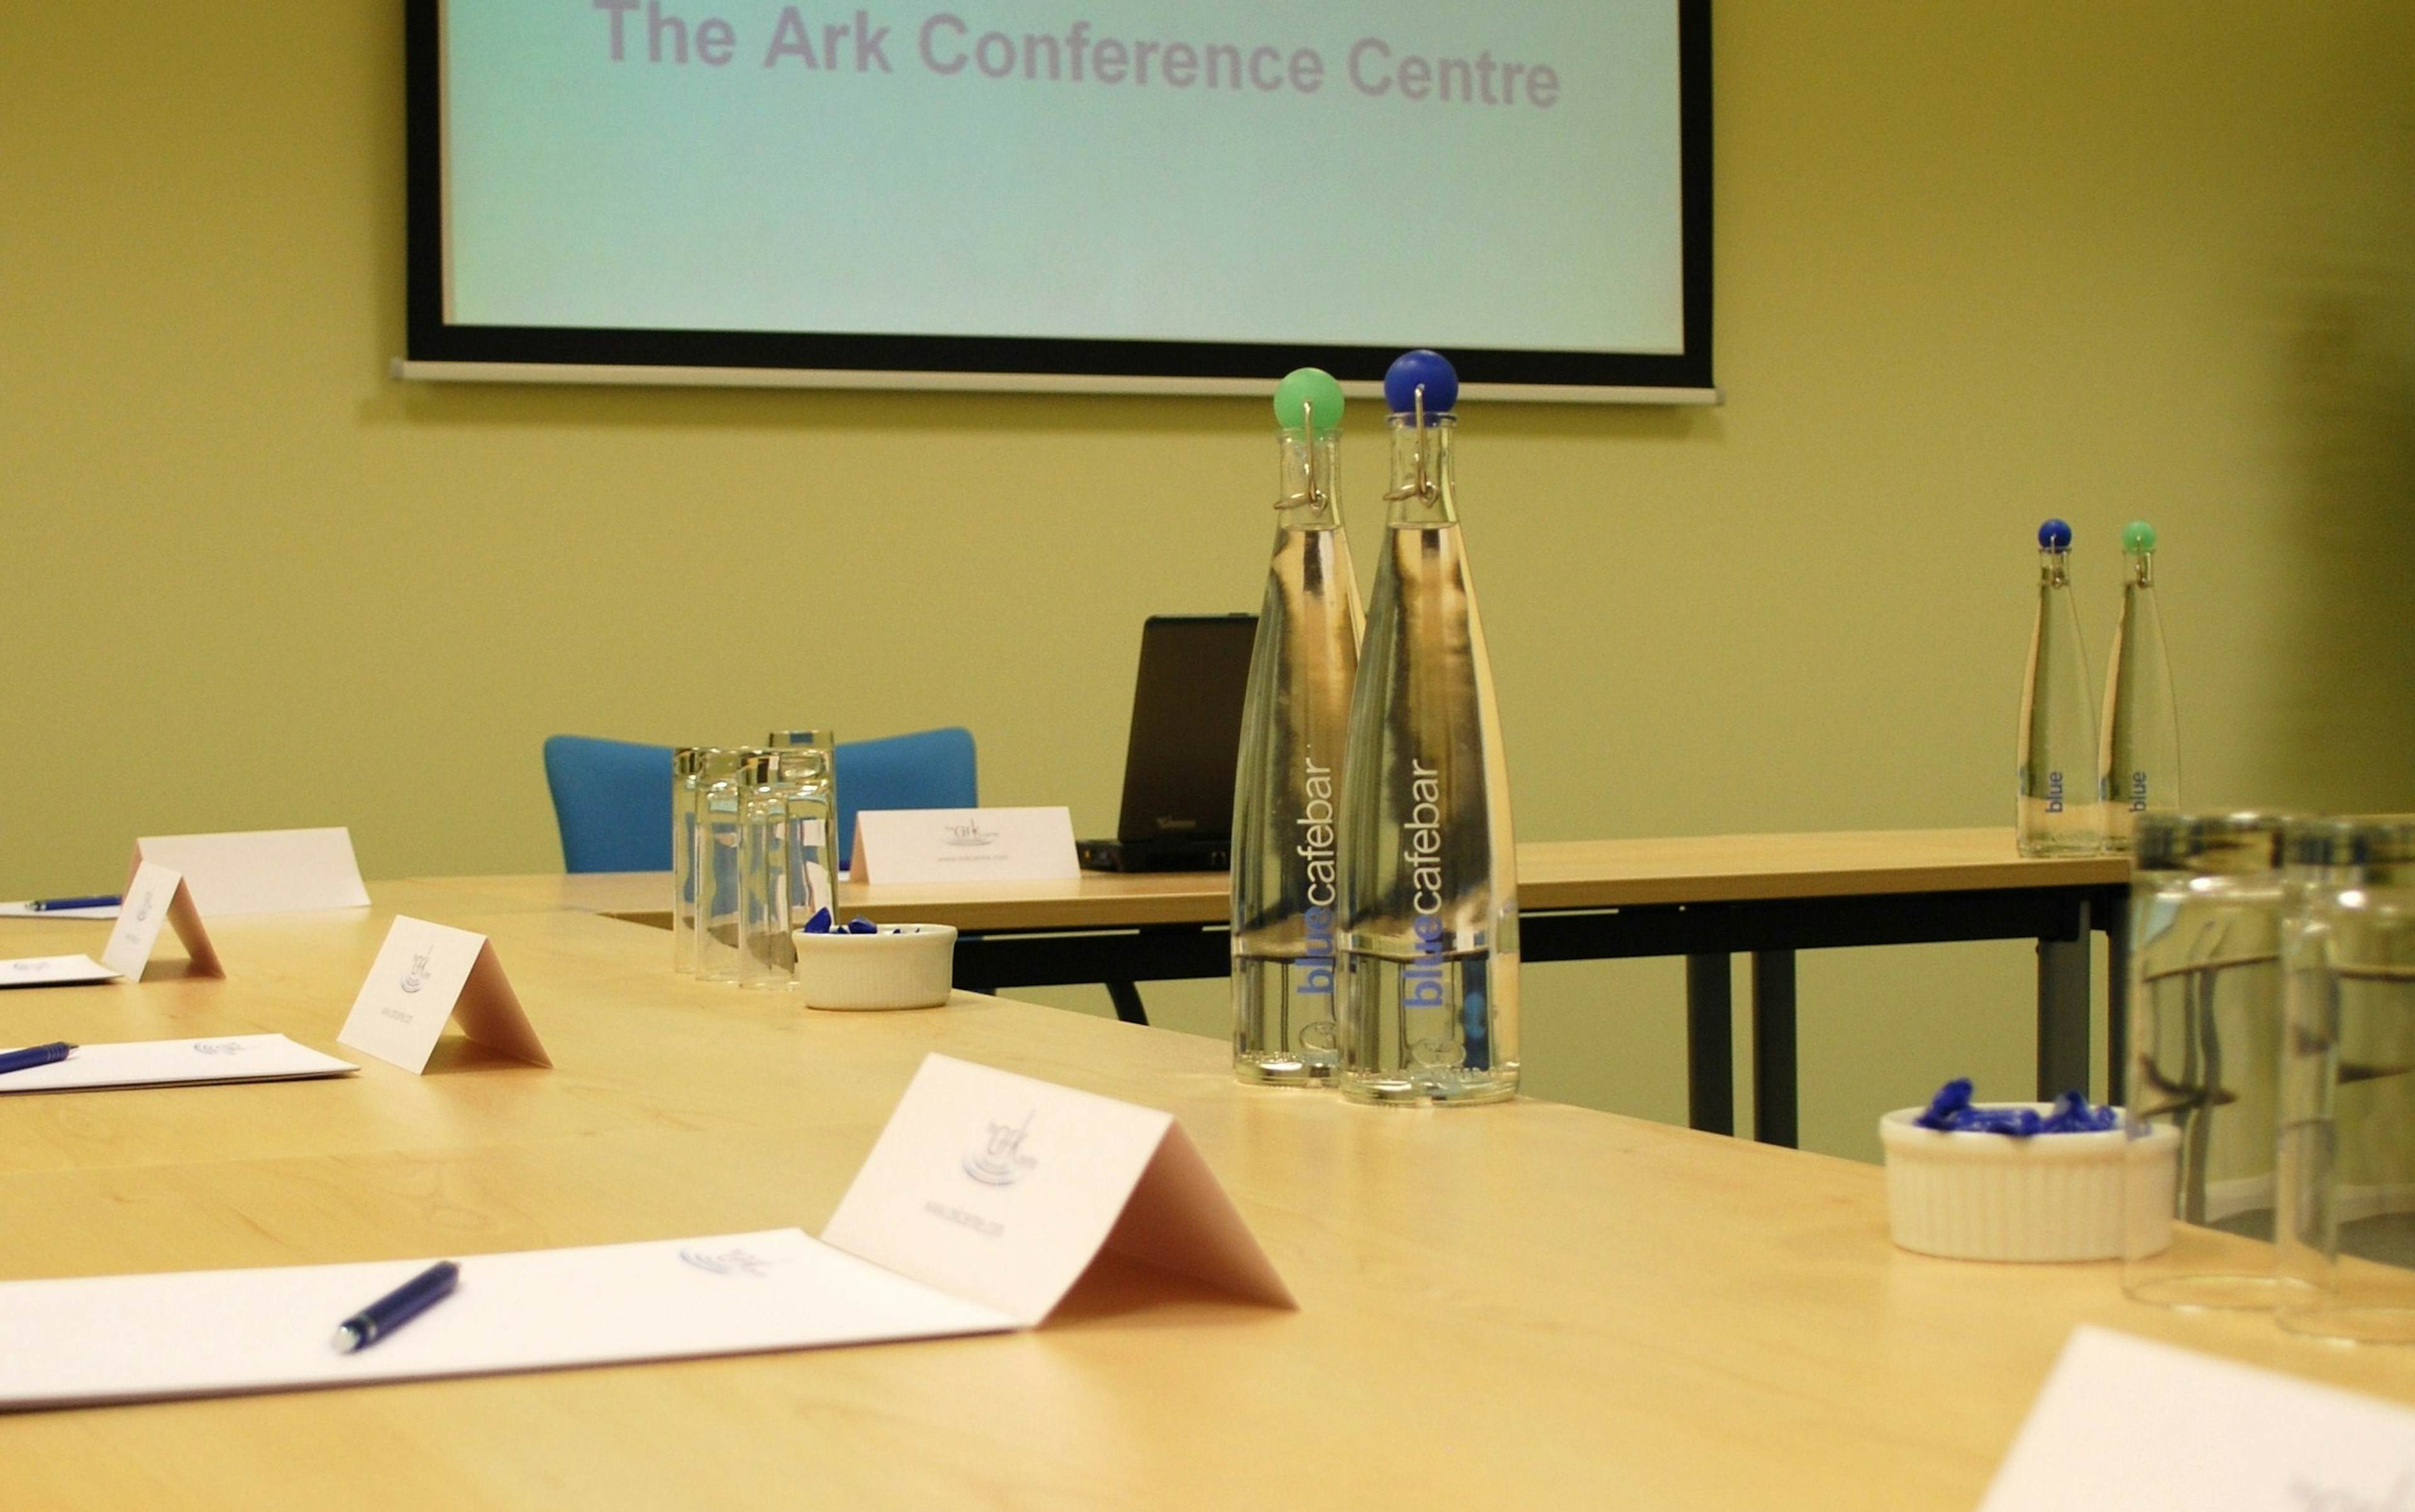 The Ark Conference Centre - Aegean image 1